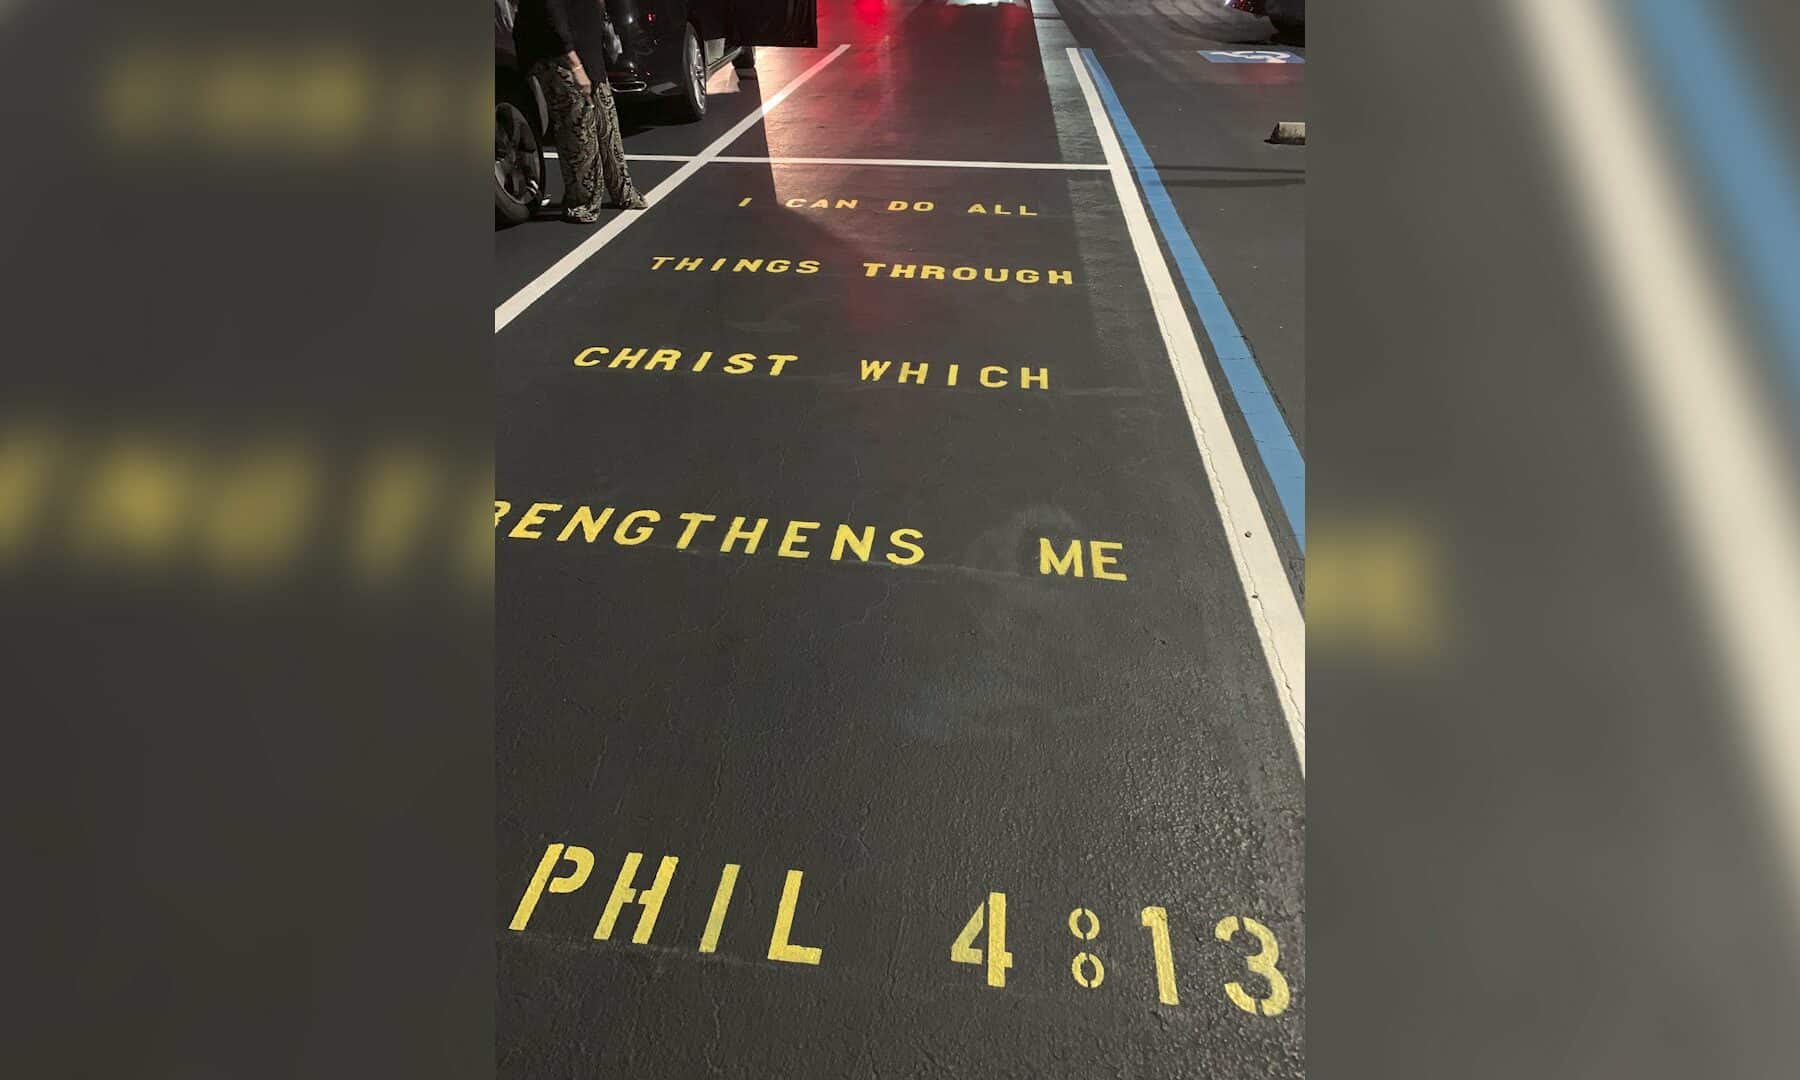 Bible verse in Pasco County school parking spot, WFLA News.